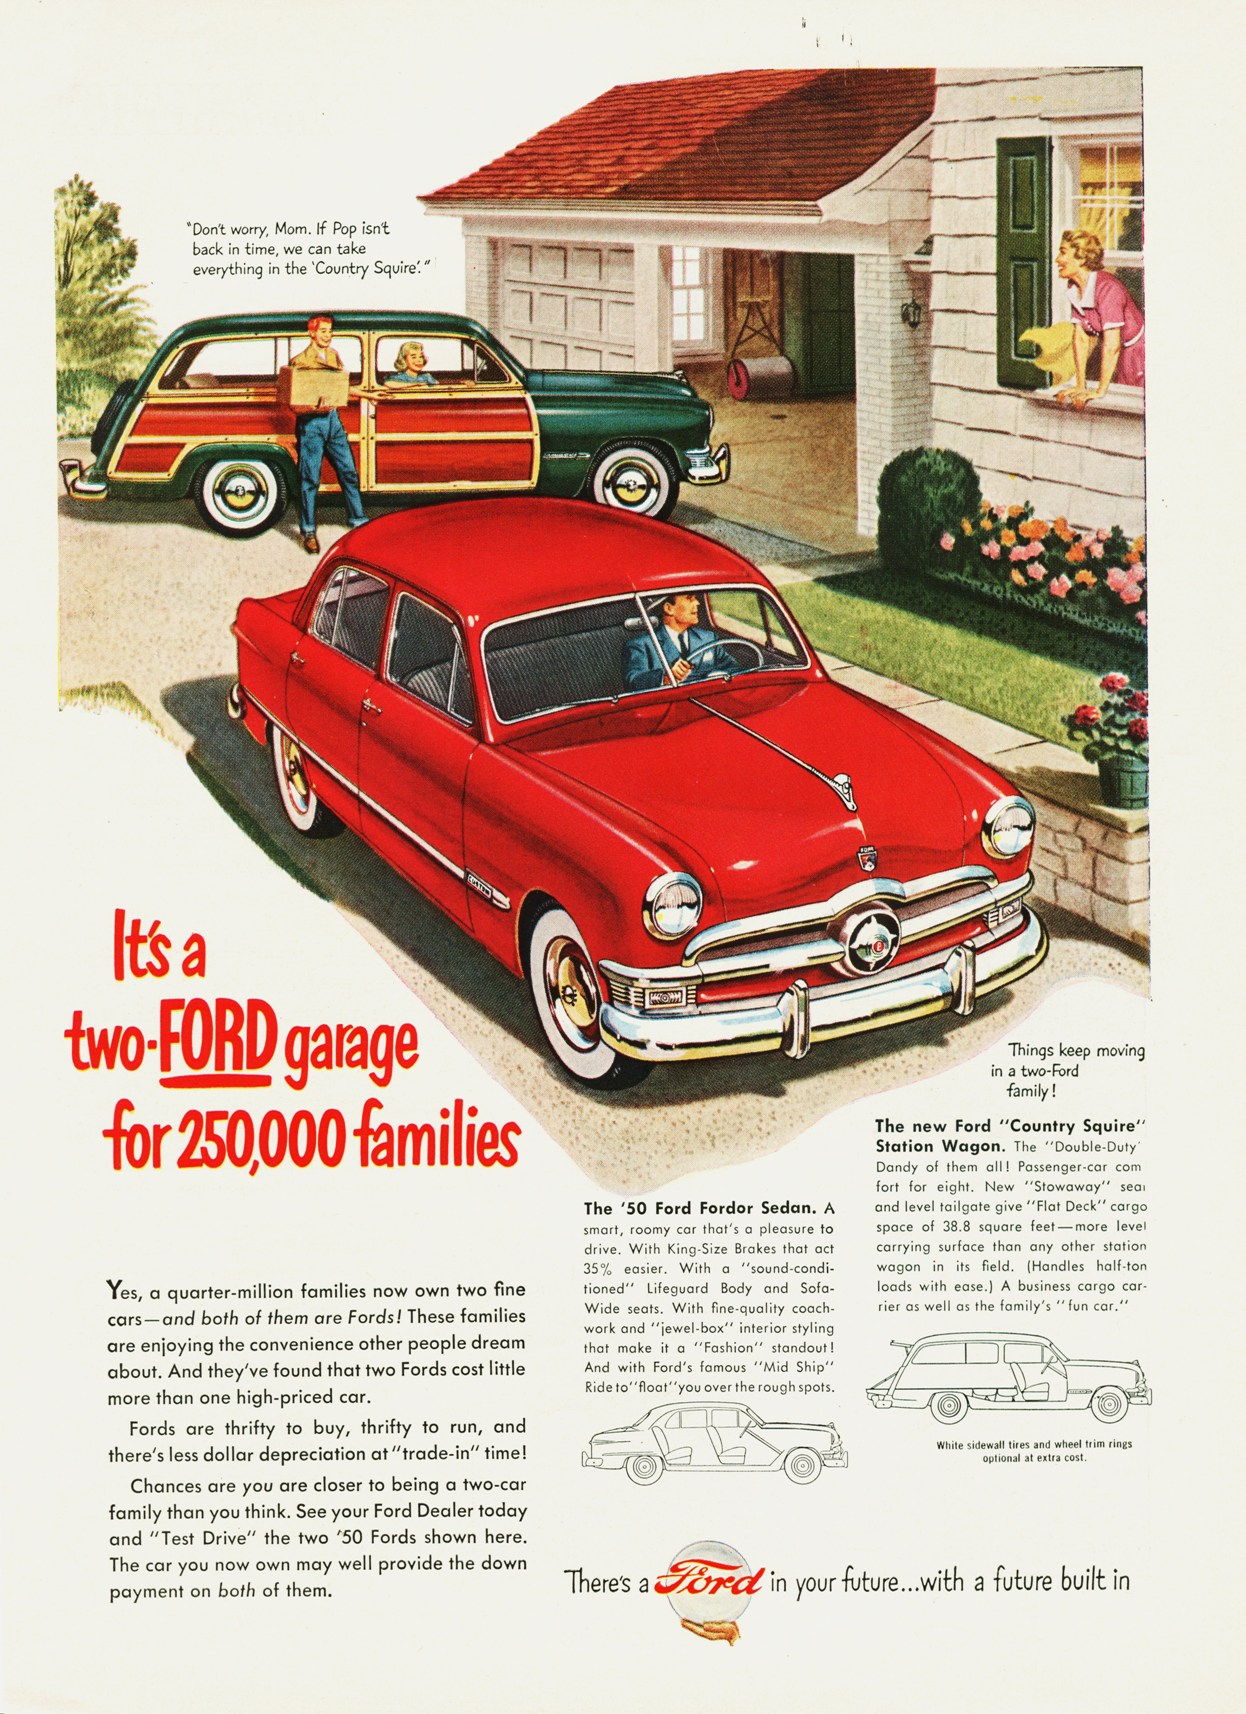 Ford adverts 1950s #1